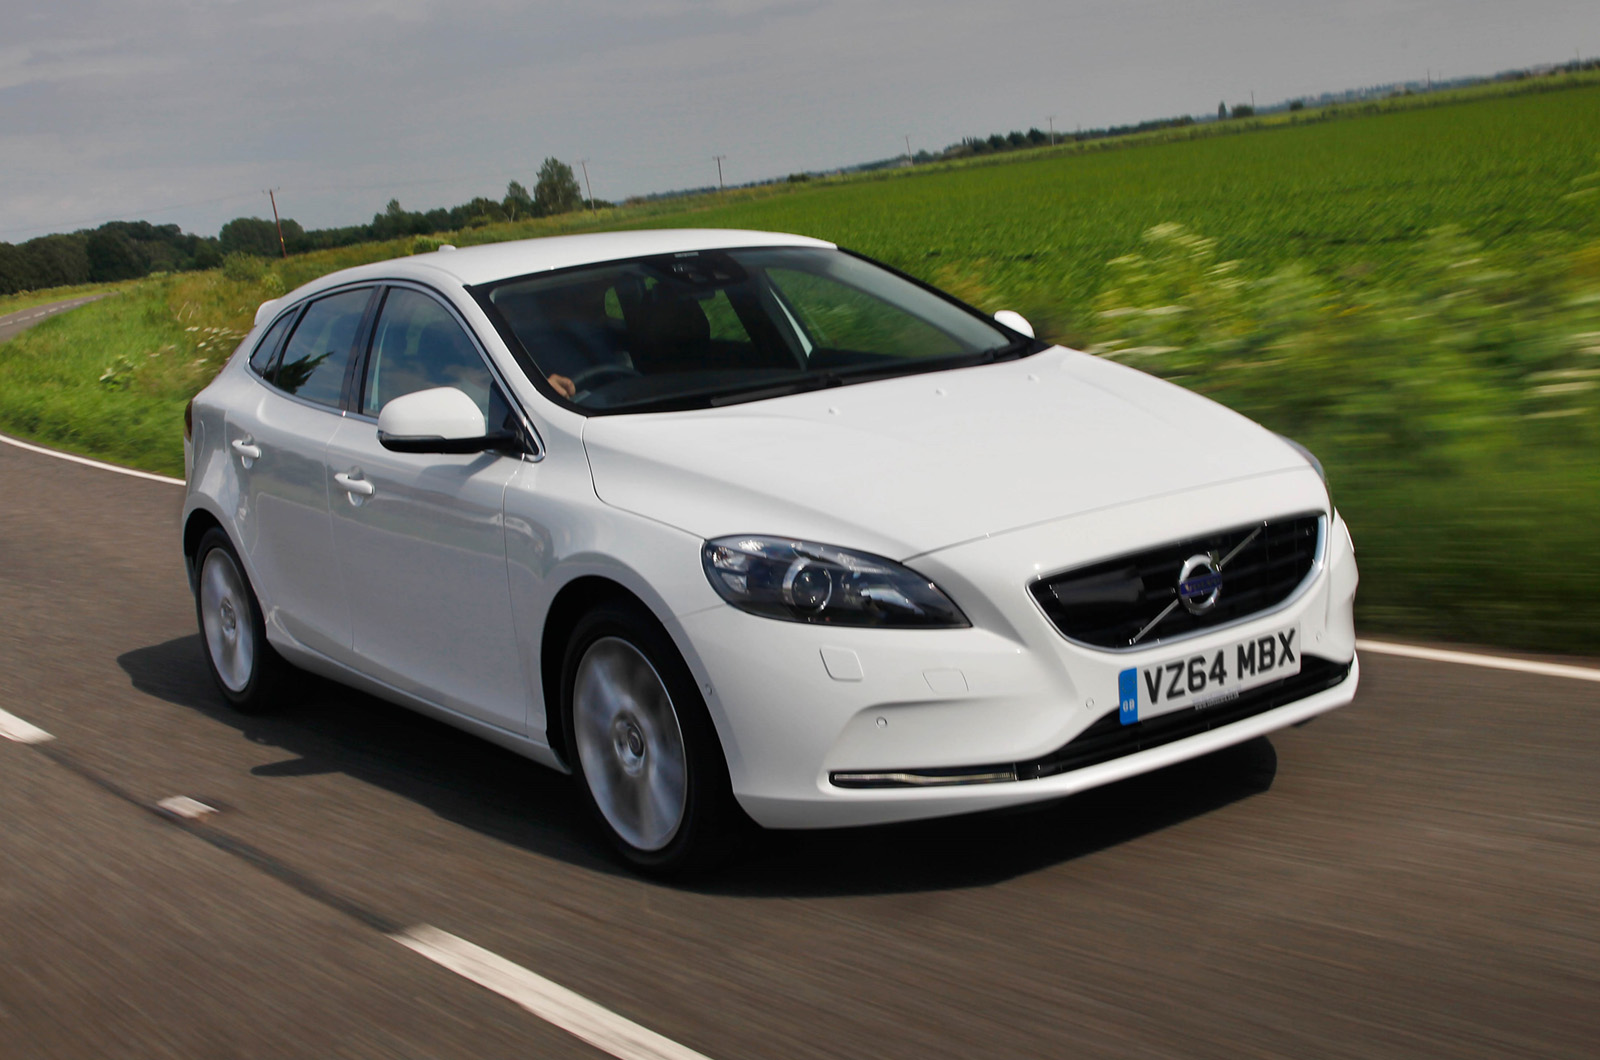 Volvo V40 T5 RDesign Lux Nav first drive review Autocar